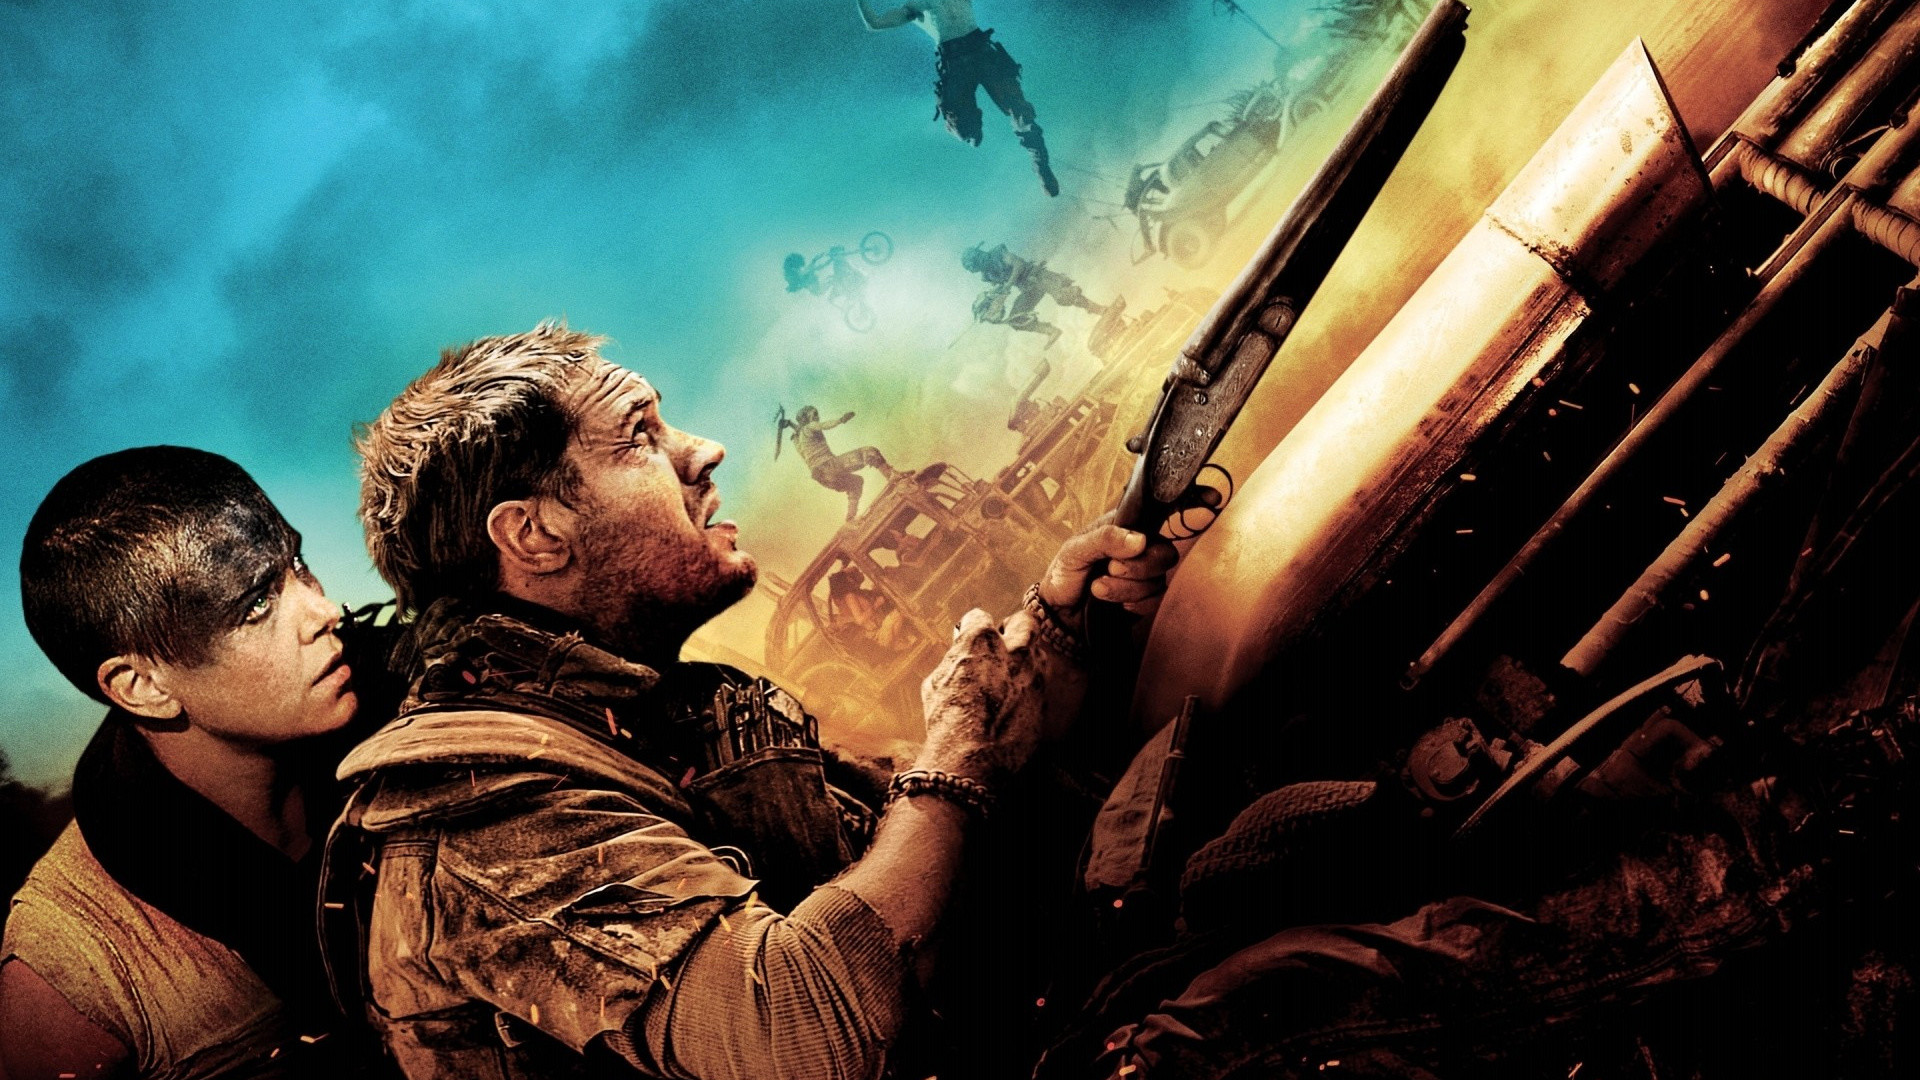 1920x1080 Action Film, Film, Mad Max Fury Road, Mad Max, Tom Hardy Full HD, HDTV,  1080p 16:9 Wallpaper in 